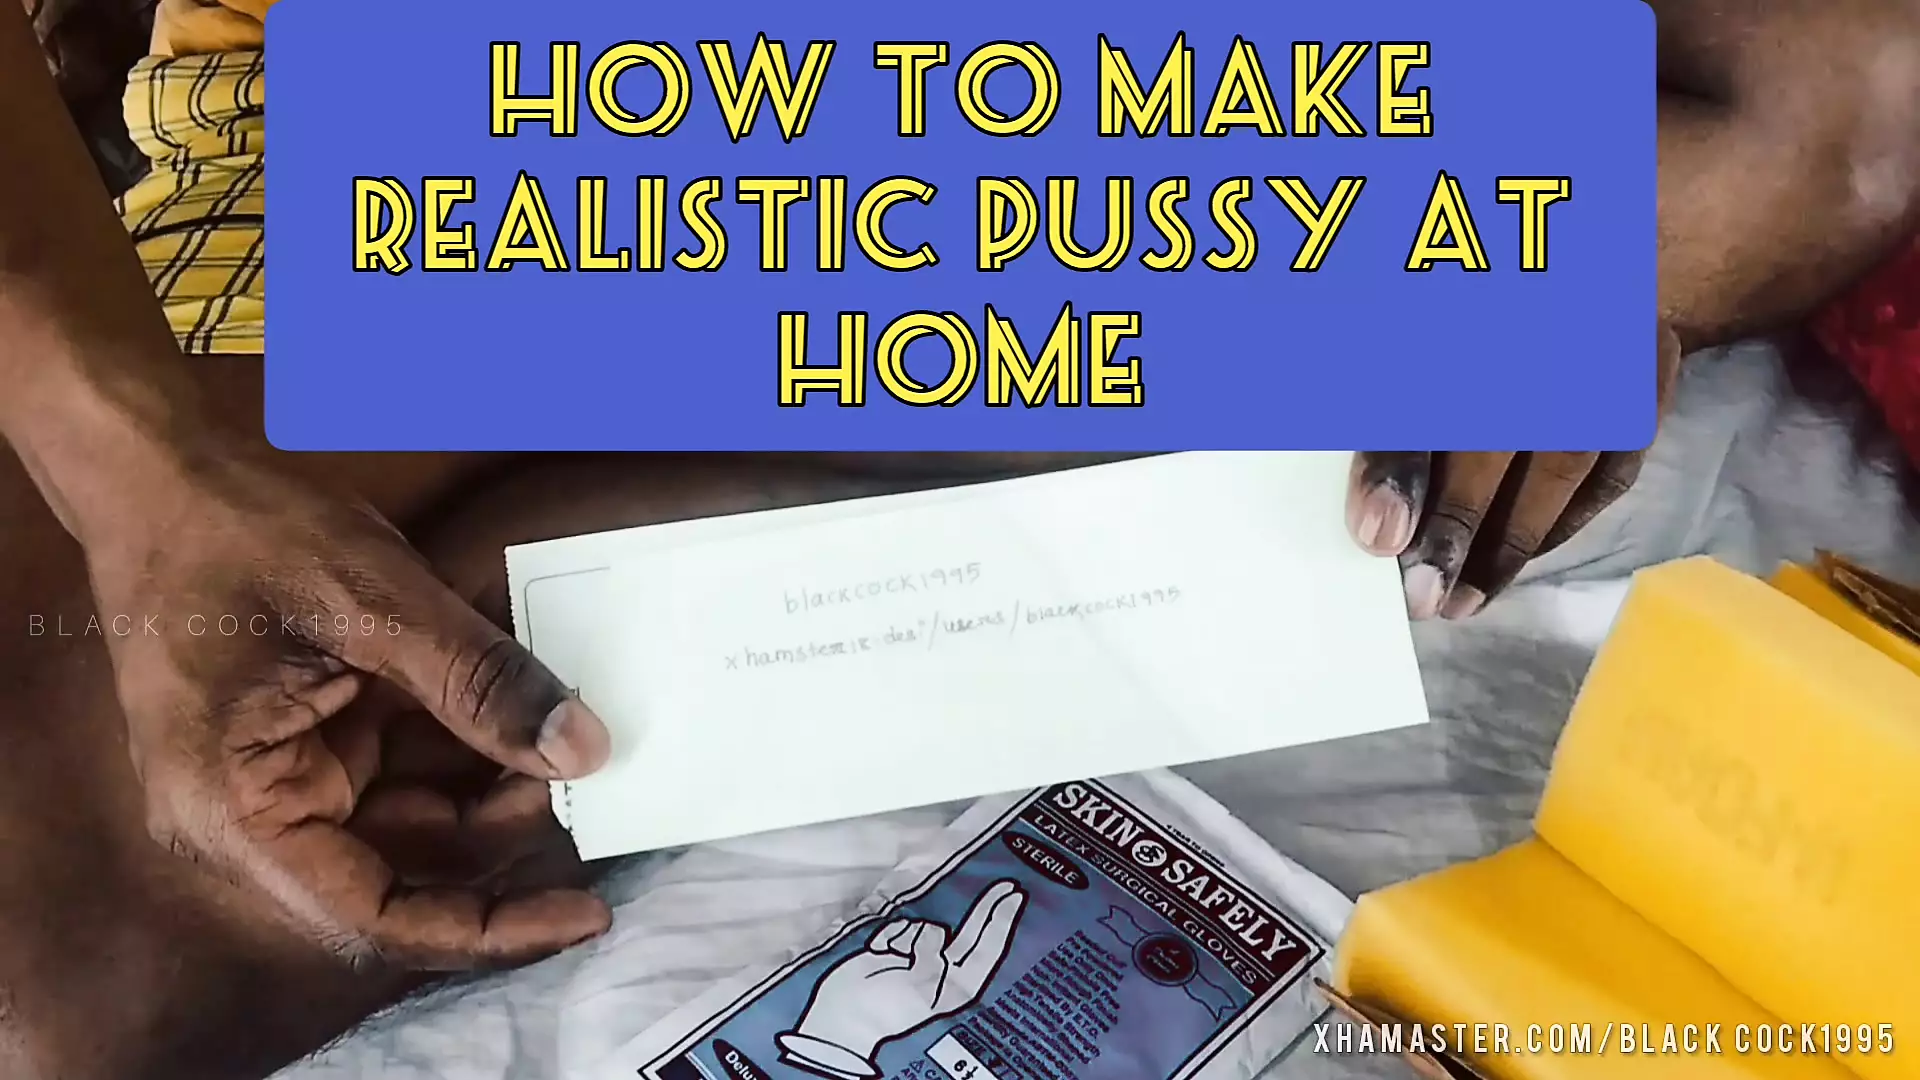 How To Make A Toy Vagina Or Anus At Home And How To Make A Sex Toy At Home By Blackcock1995 photo